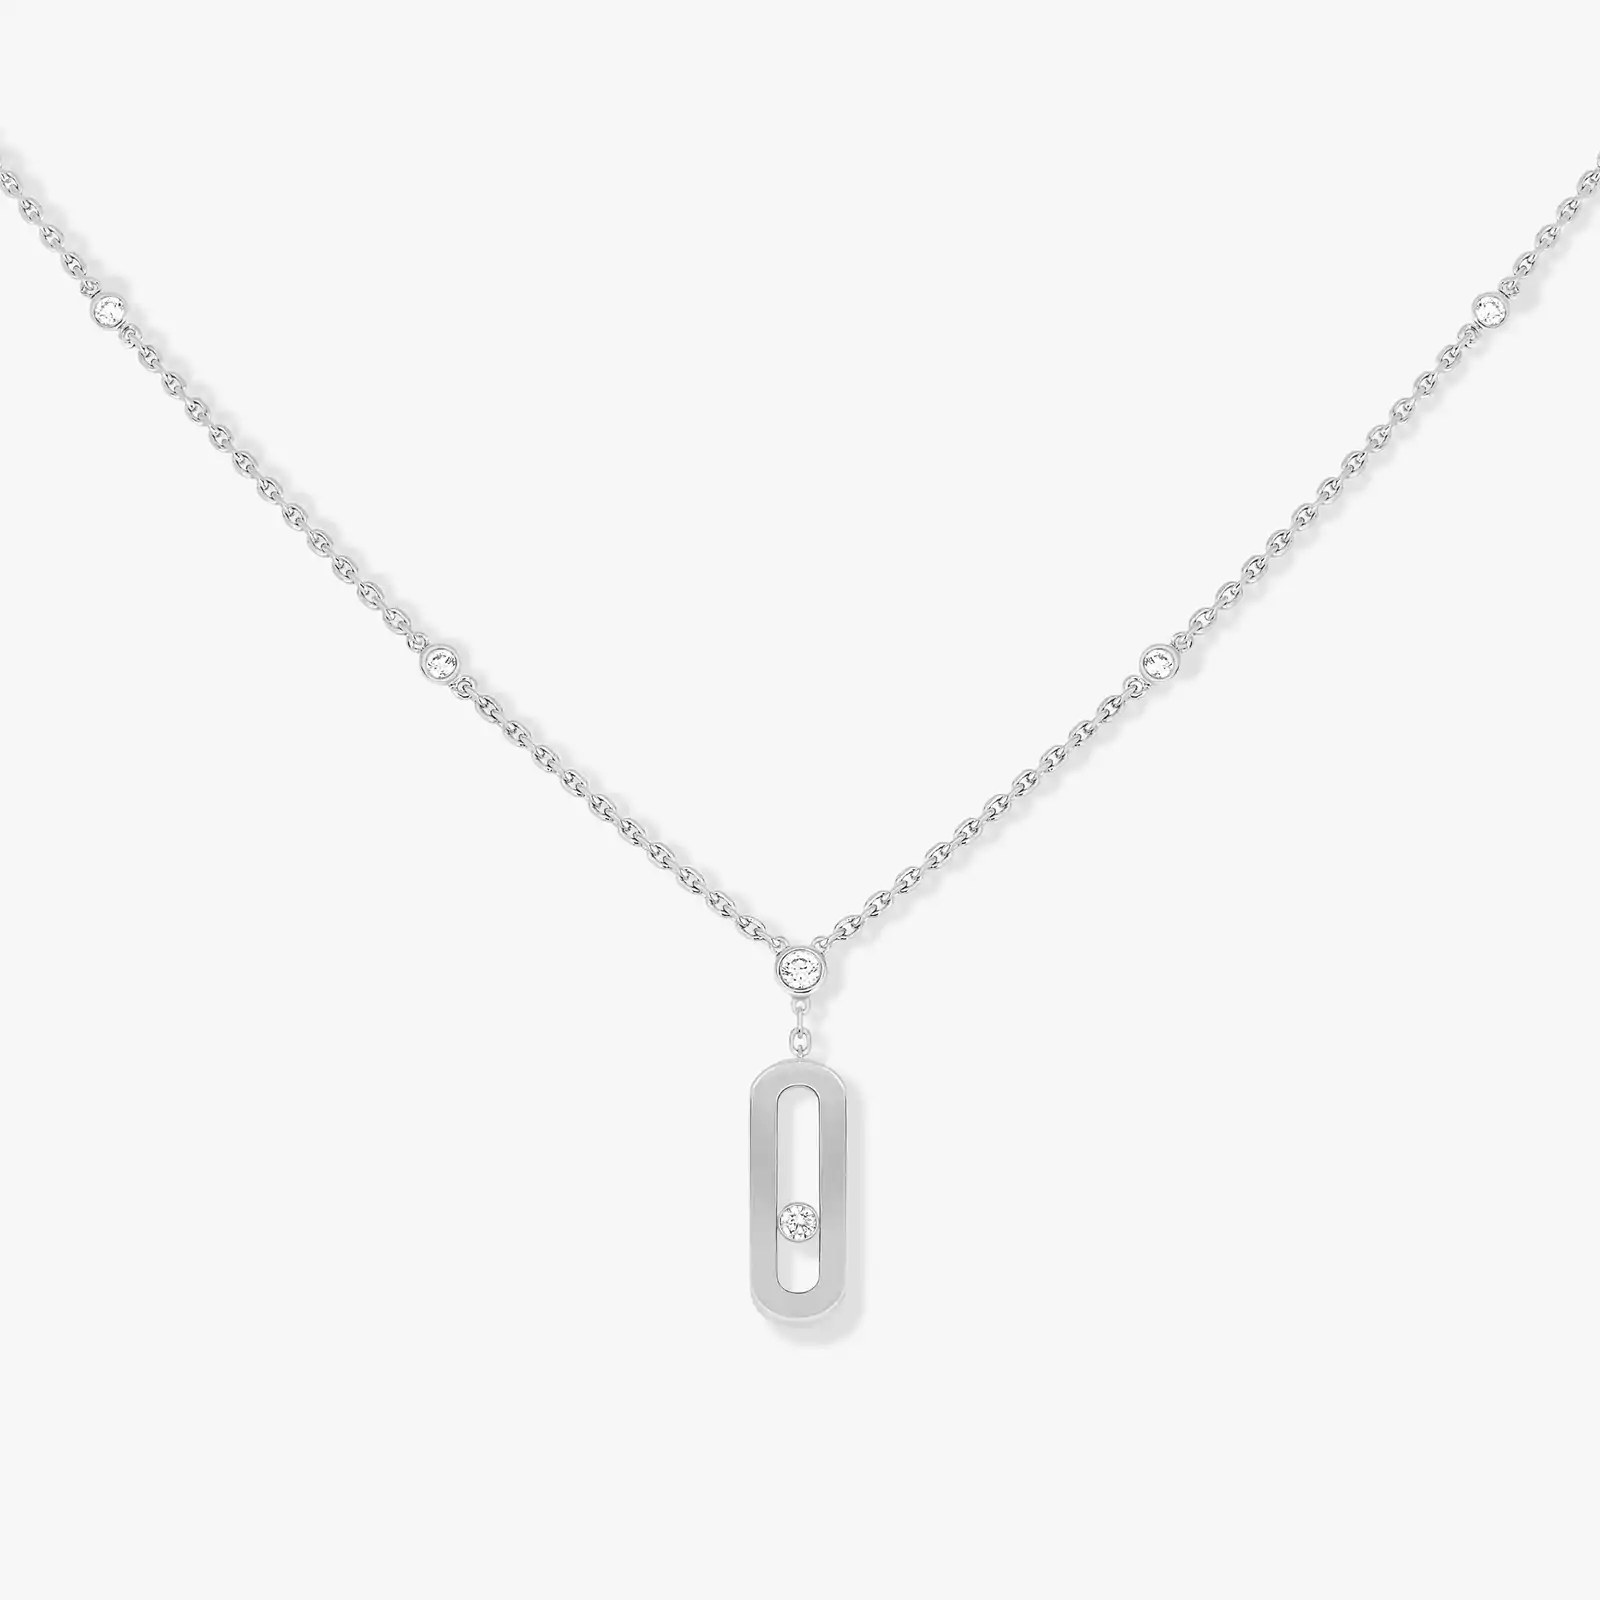 Collier Femme Or Blanc Diamant Long Move Uno 10111-WG